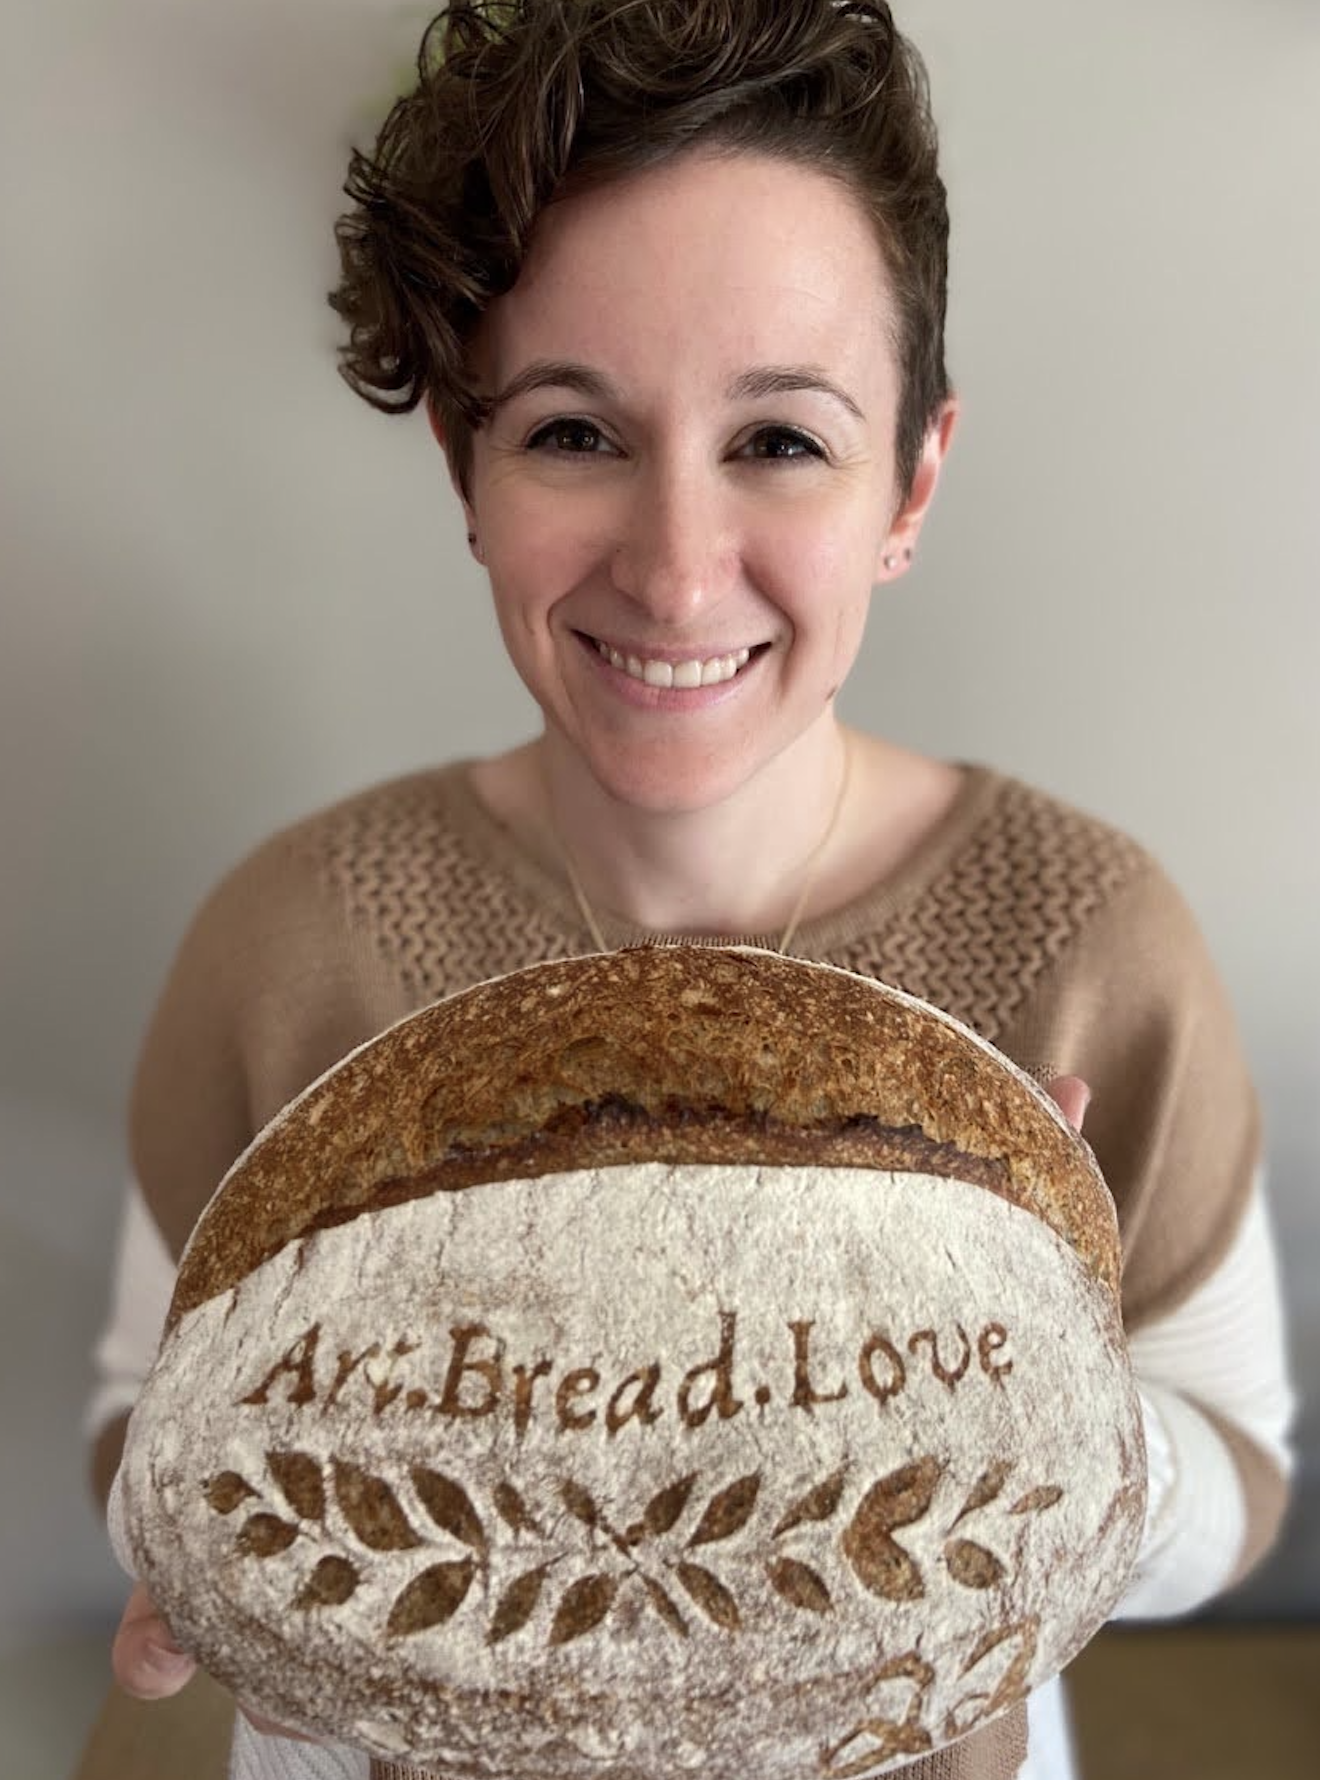 interview with home baker renee from artbreadlove on instagram sharing her story 2